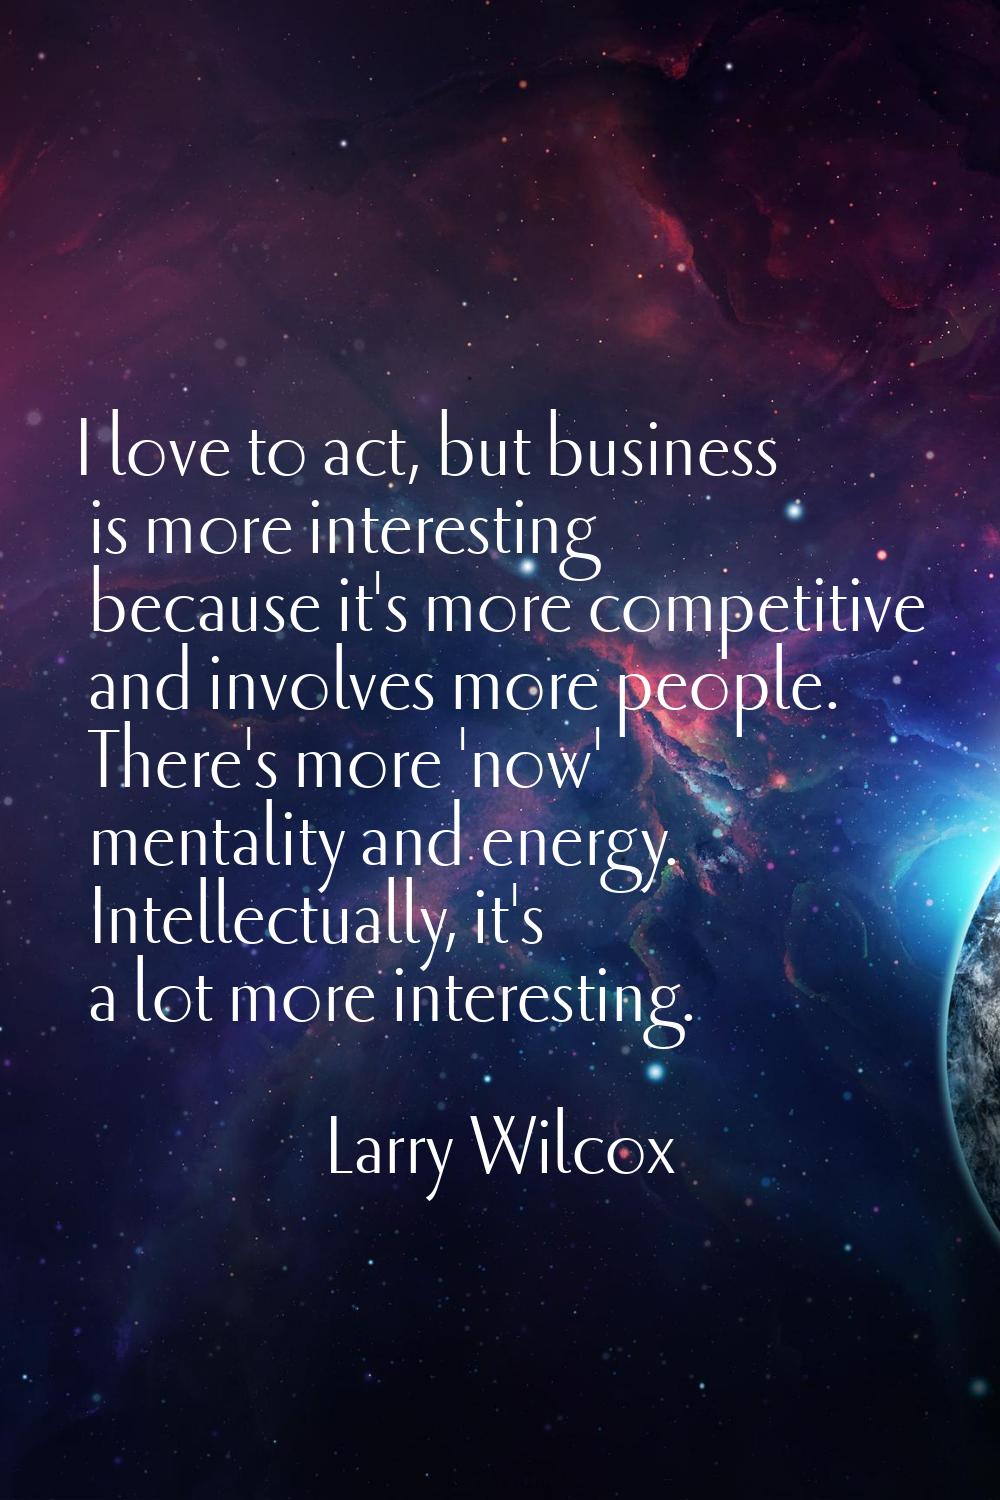 I love to act, but business is more interesting because it's more competitive and involves more peo